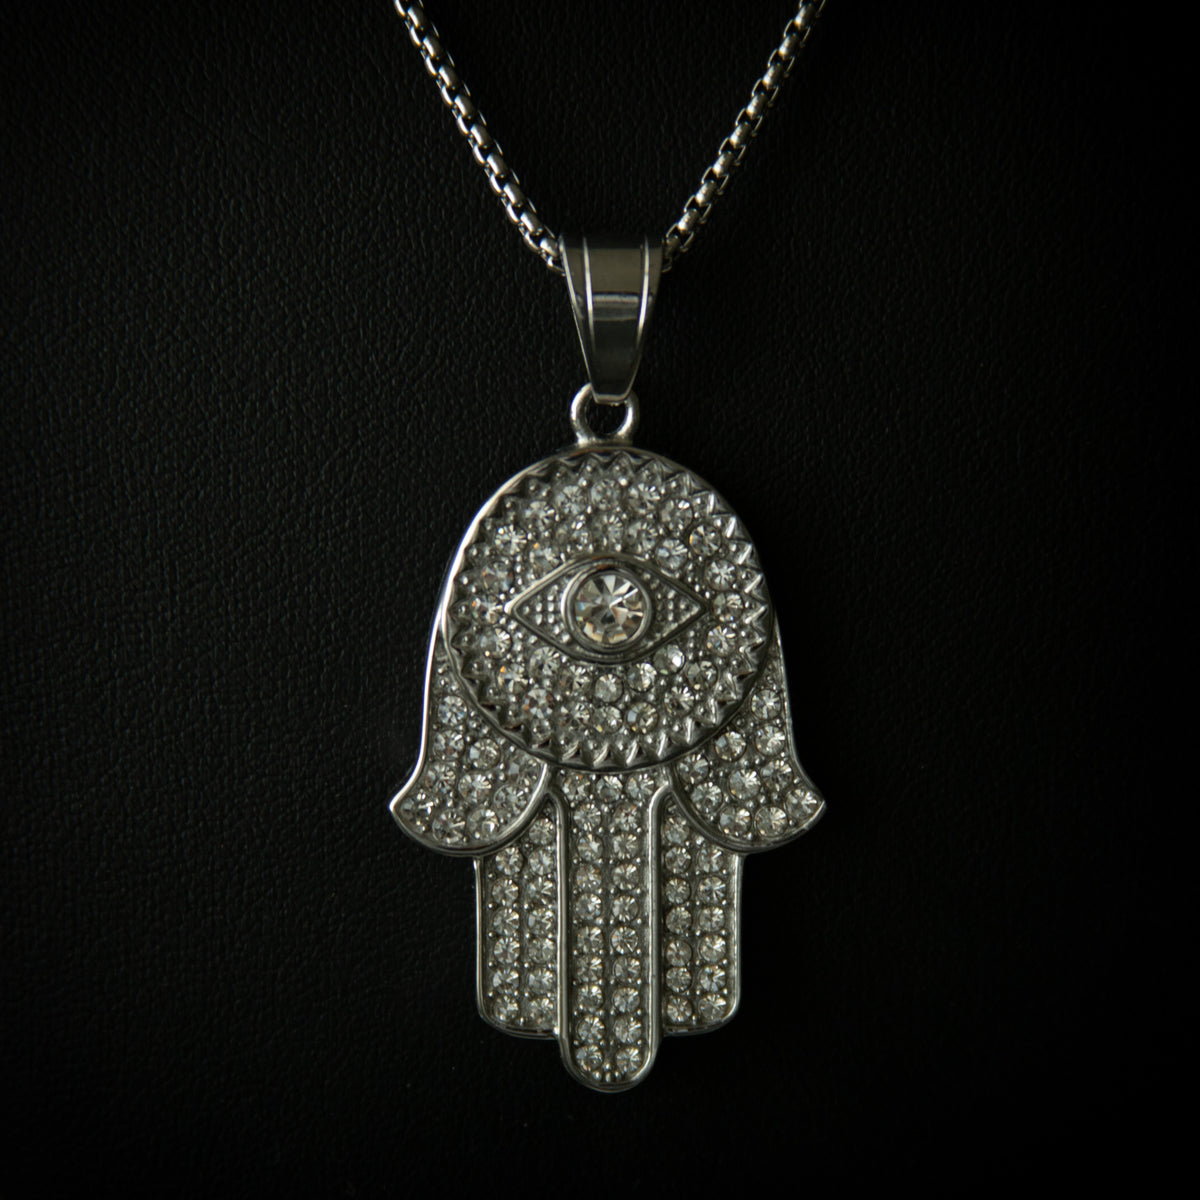 Big Hamsa Hand Pendent With Necklace - Silver with Clear Crystal Stones